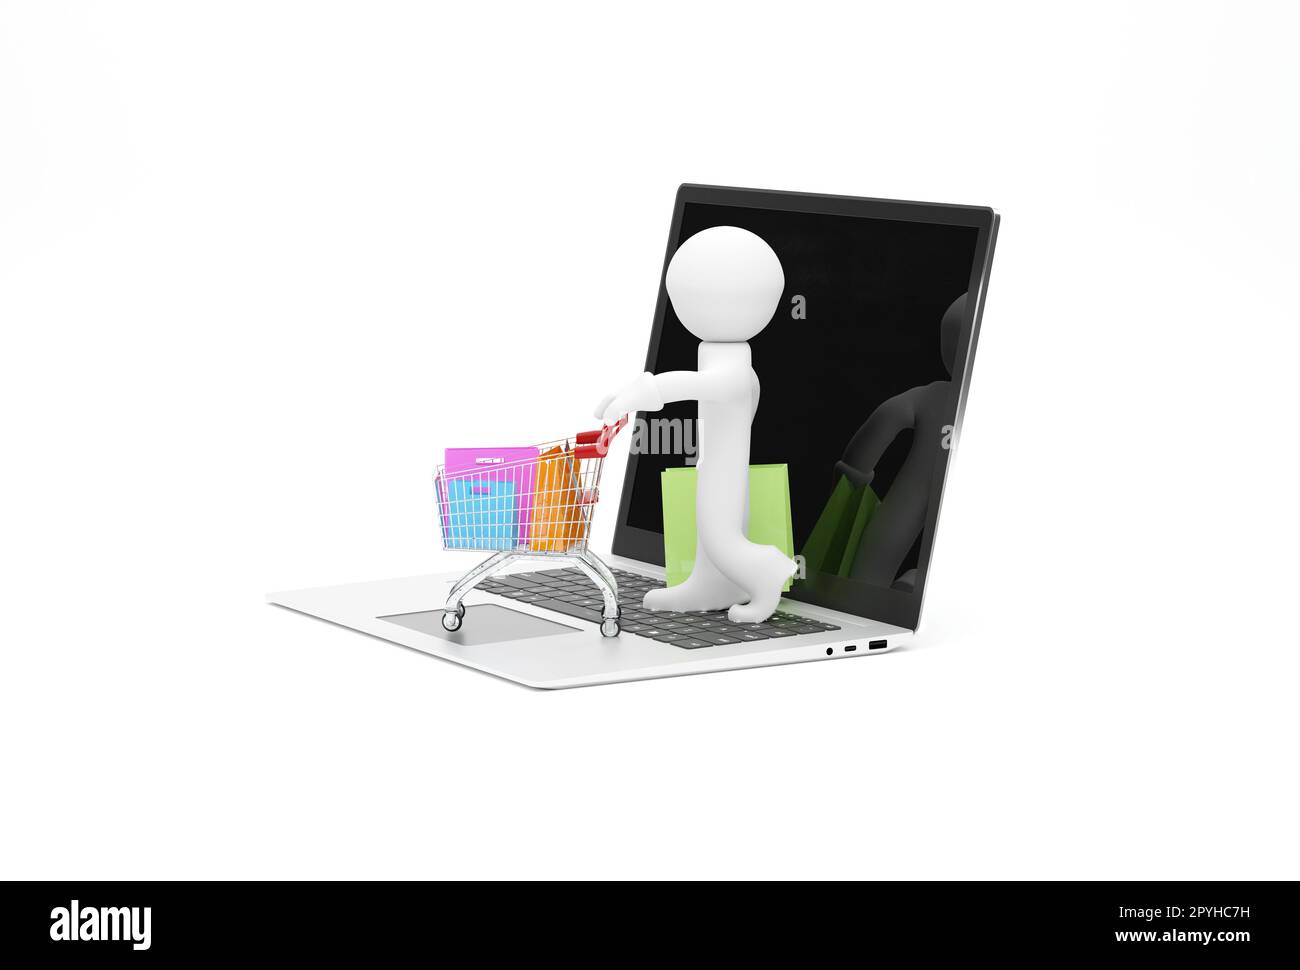 Small character with a shopping cart on a laptop computer Stock Photo